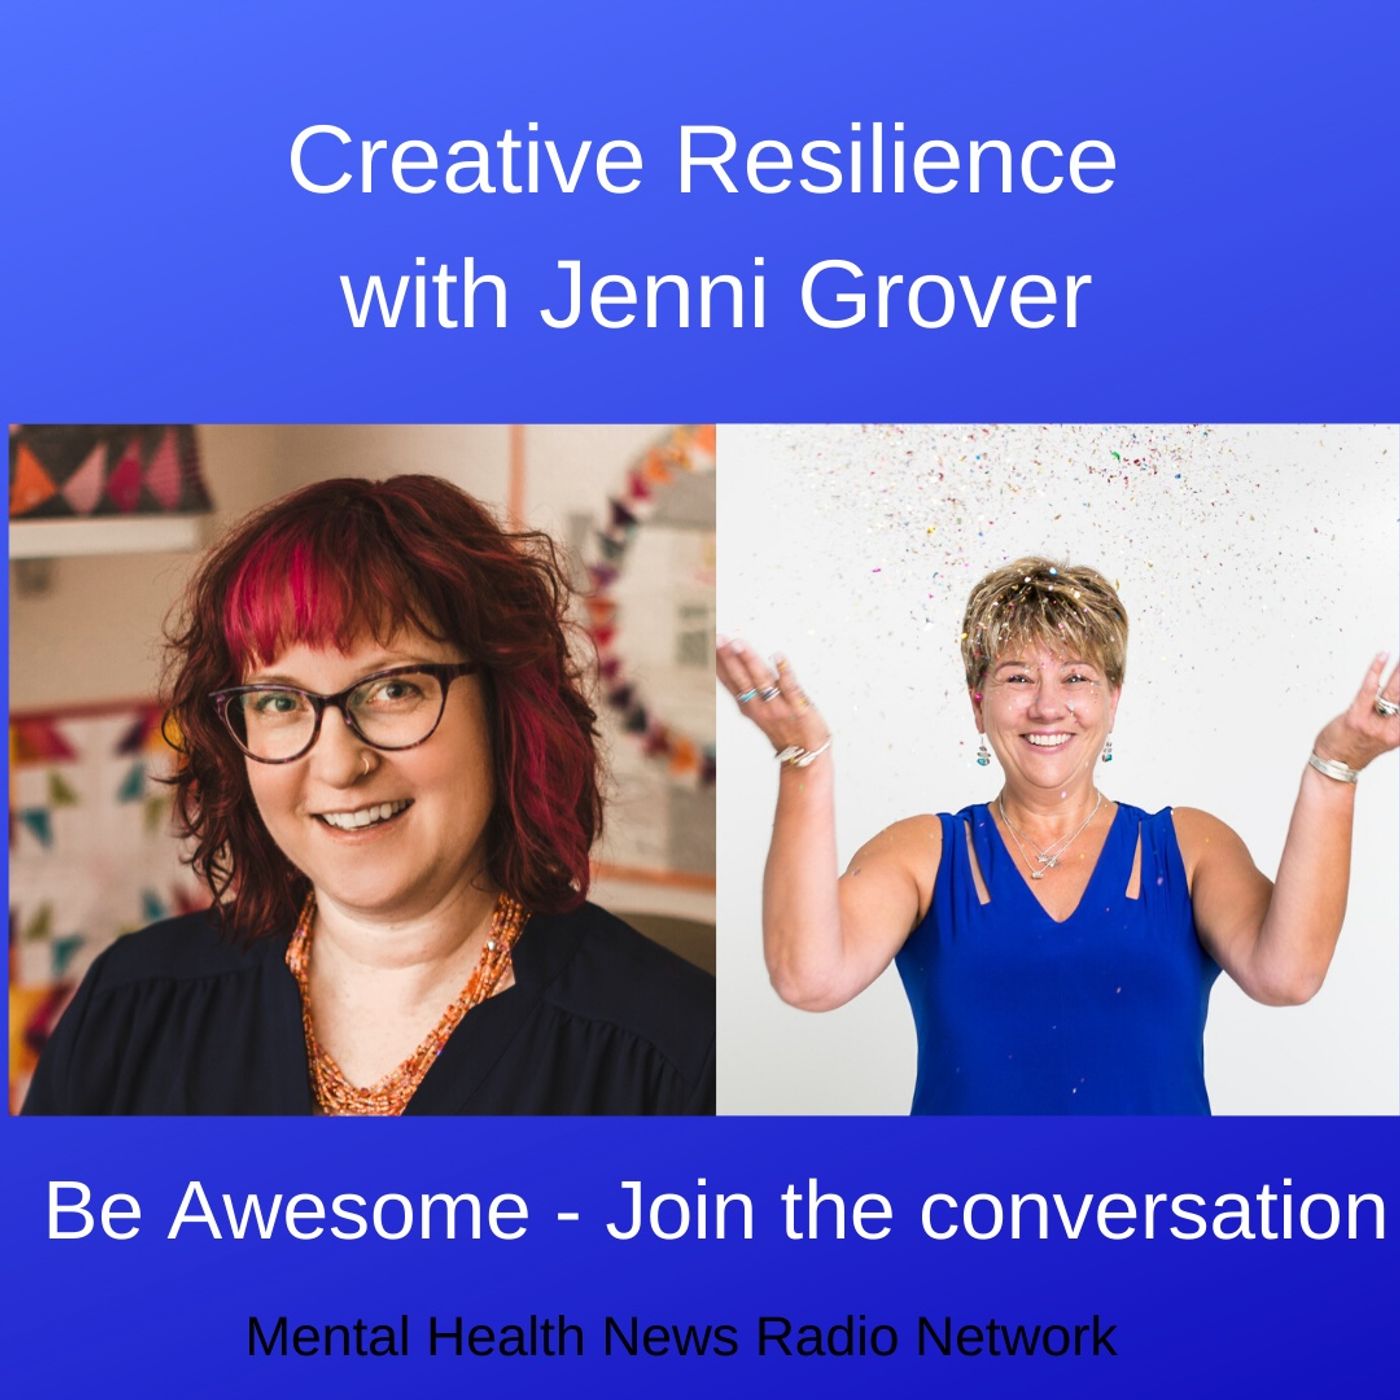 Creative Resilience with Jenni Grover